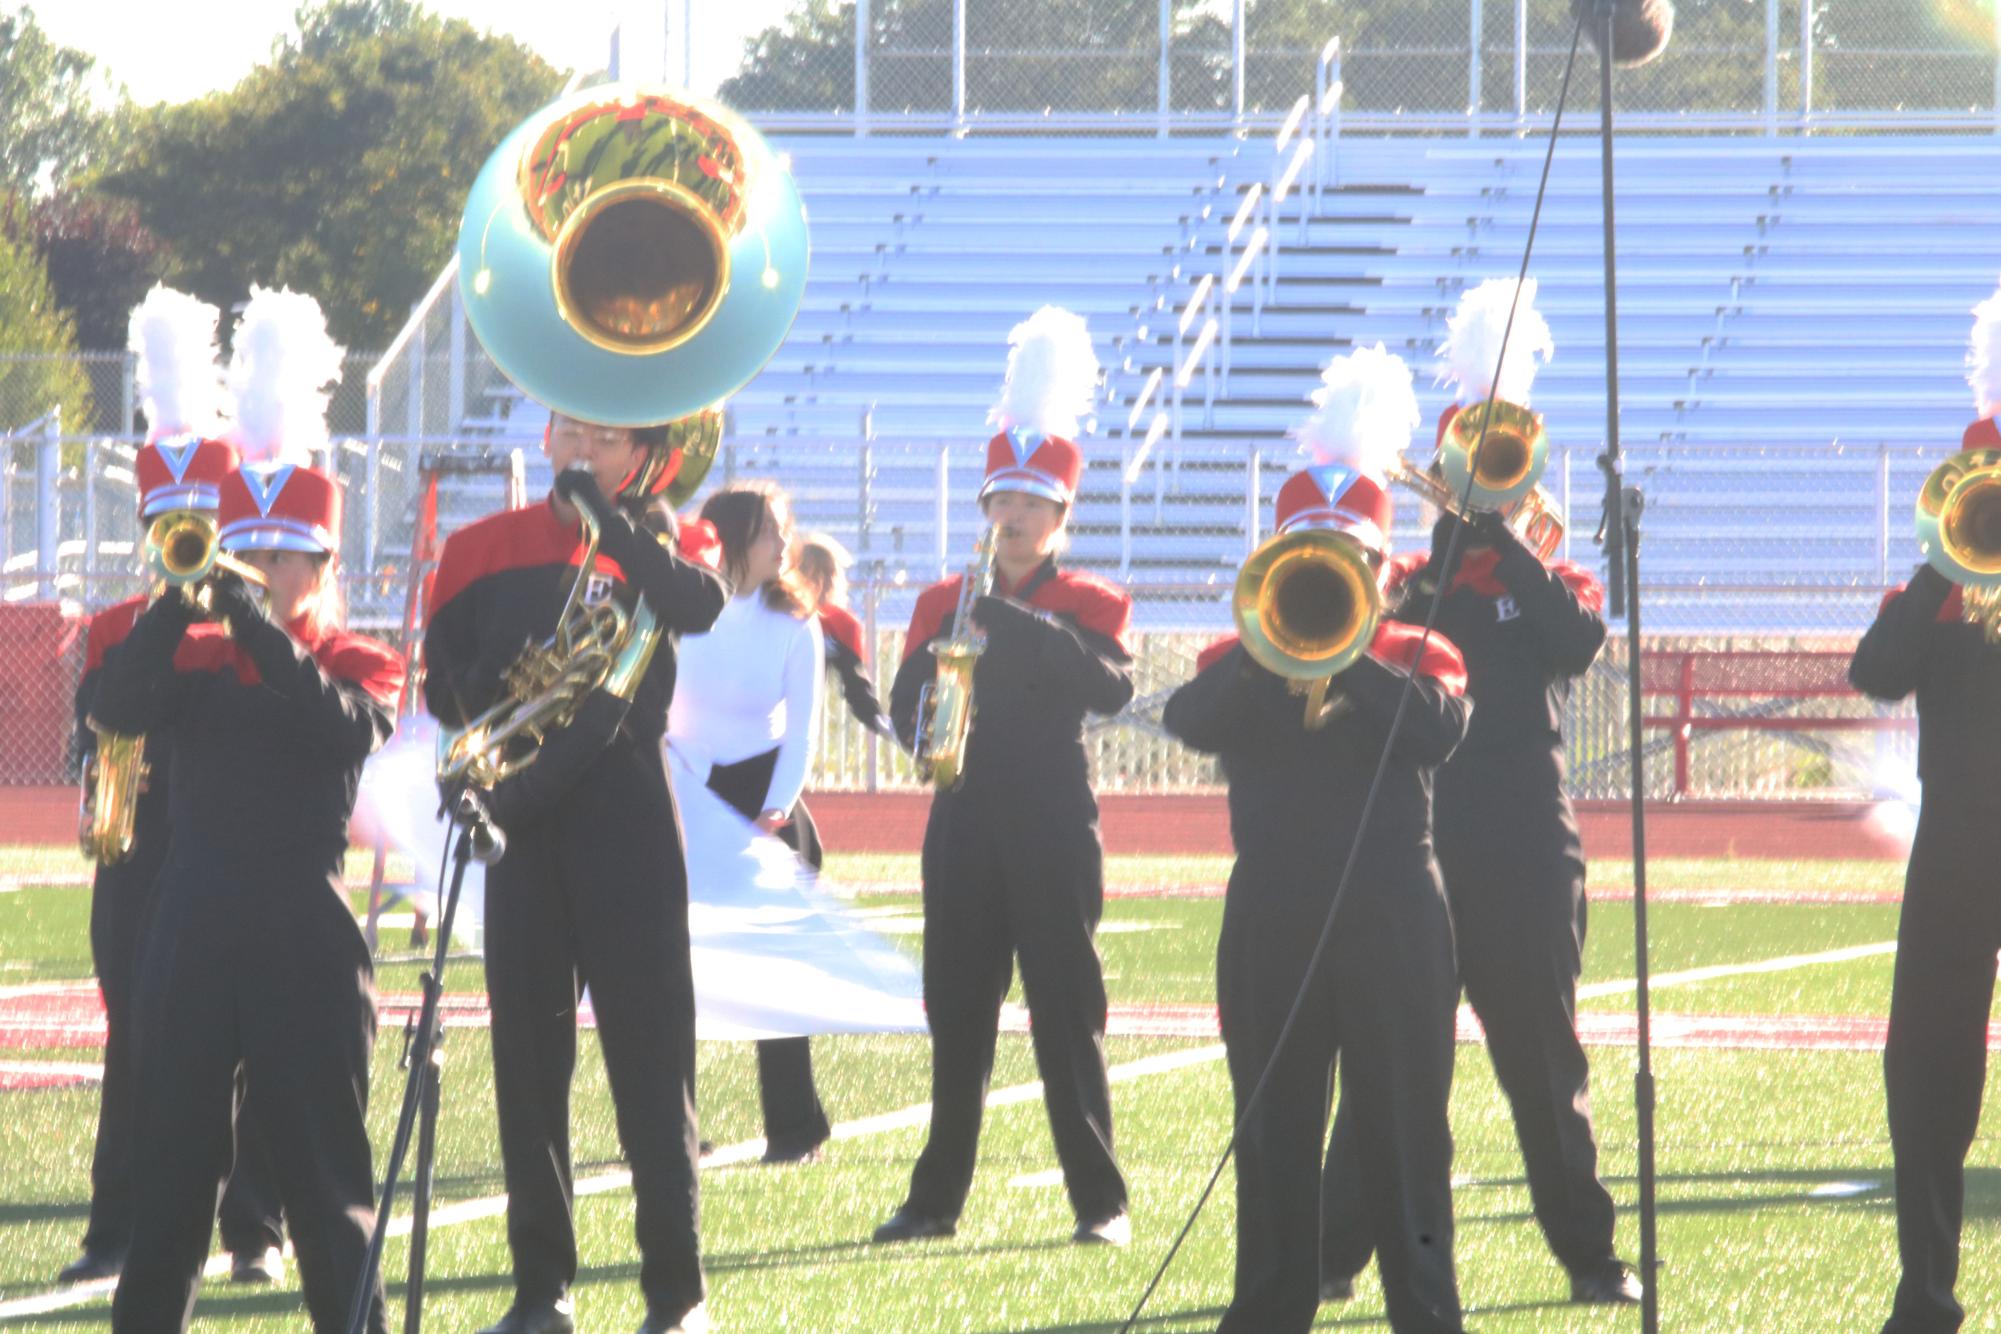 Eaton High School hosts first marching band competition